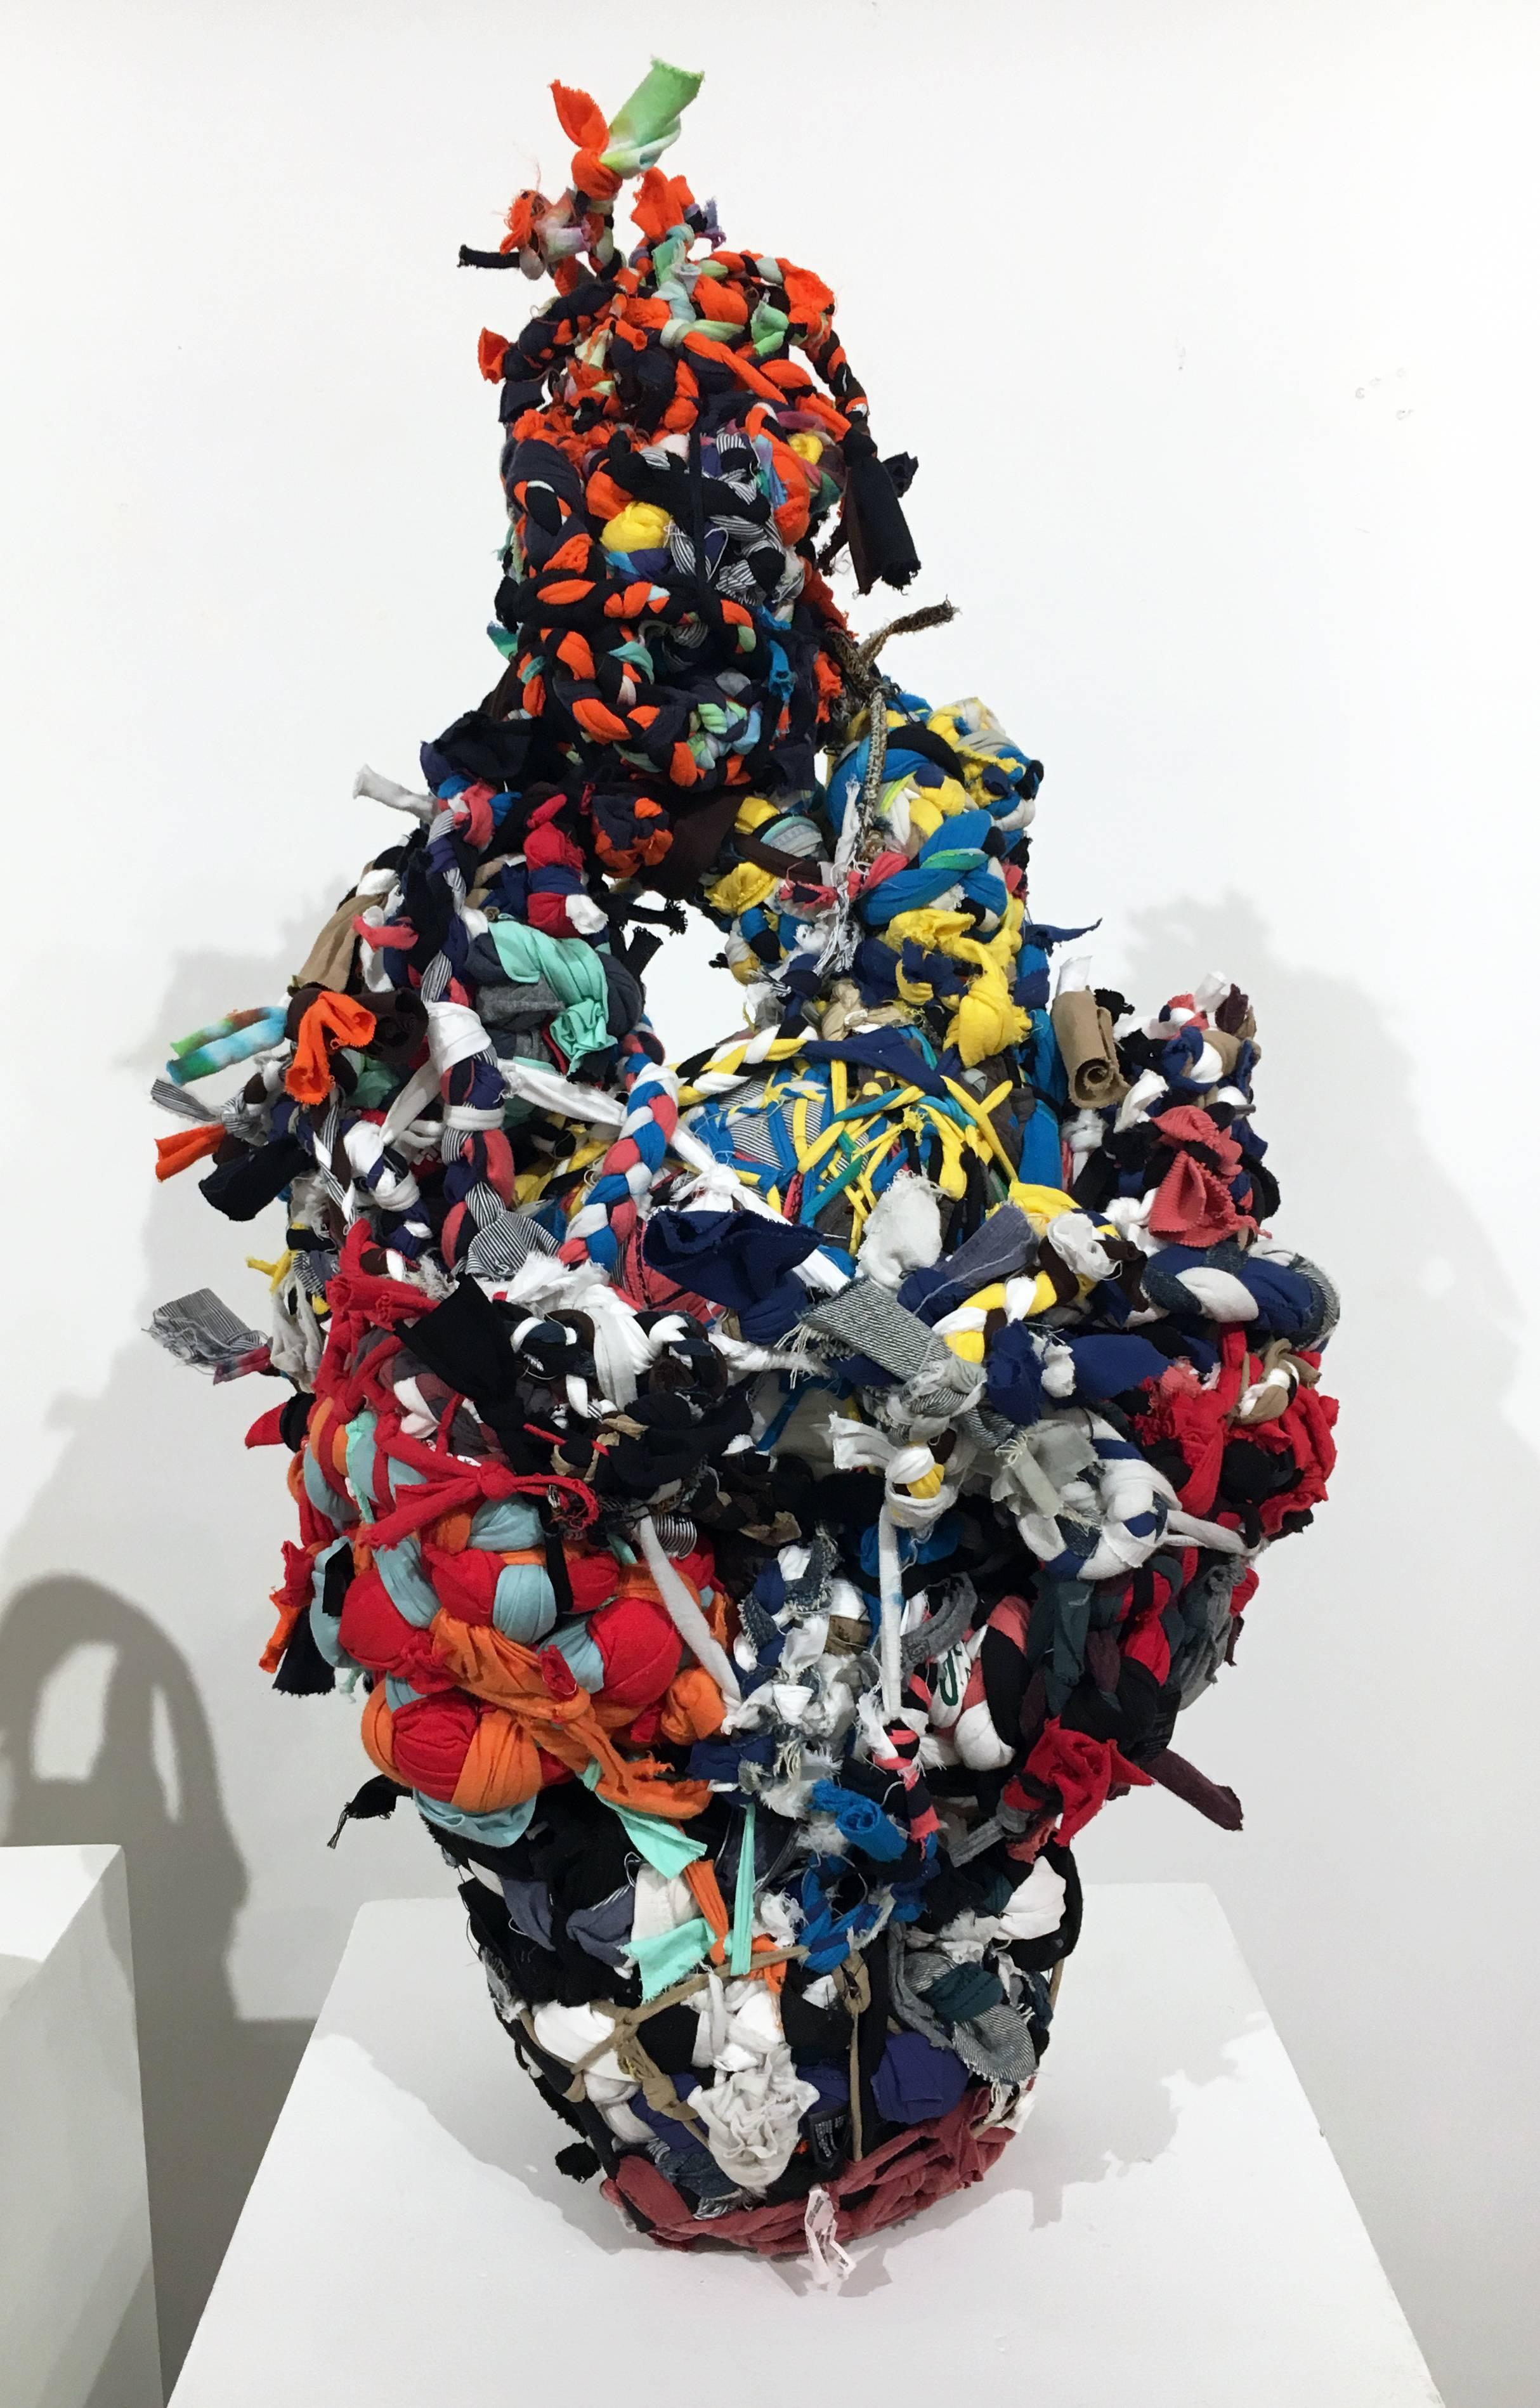 Ethan Meyer Abstract Sculpture - "Shaman in Ecstasy" , Torn, Braided, Coiled, and Knotted Fabric Sculpture